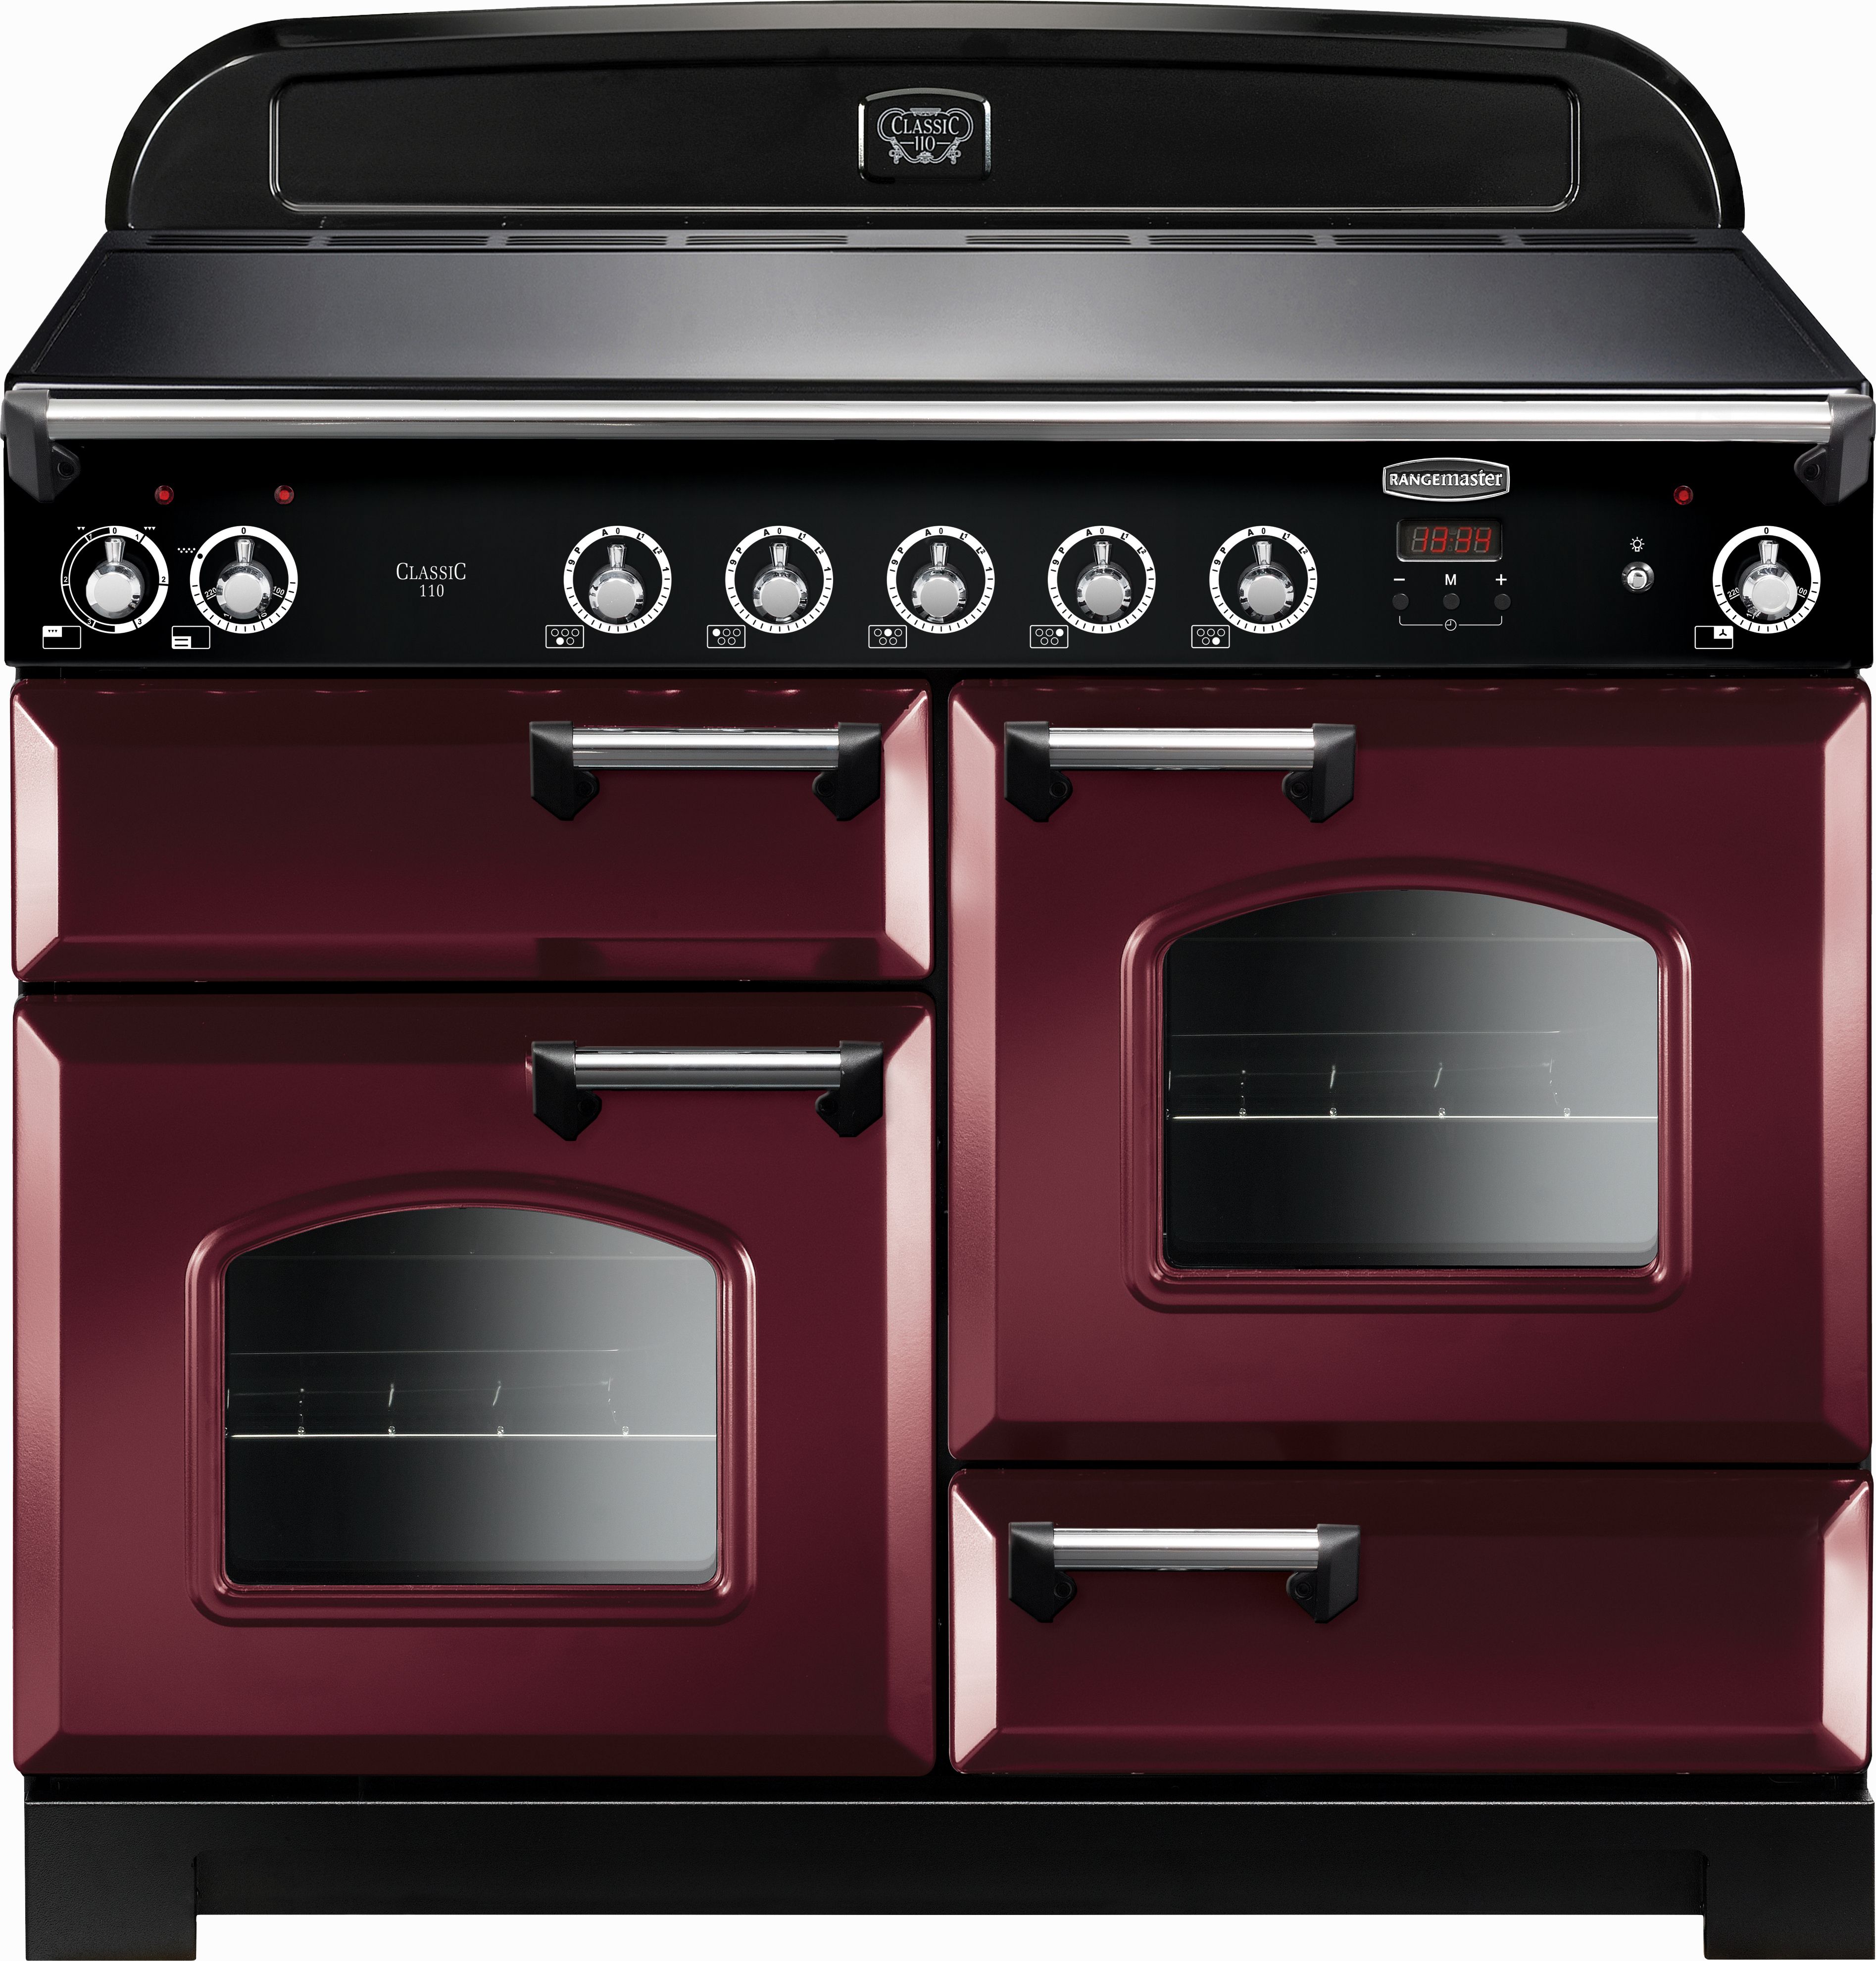 Rangemaster Classic CLA110EICY/C 110cm Electric Range Cooker with Induction Hob - Cranberry / Chrome - A/A Rated, Red